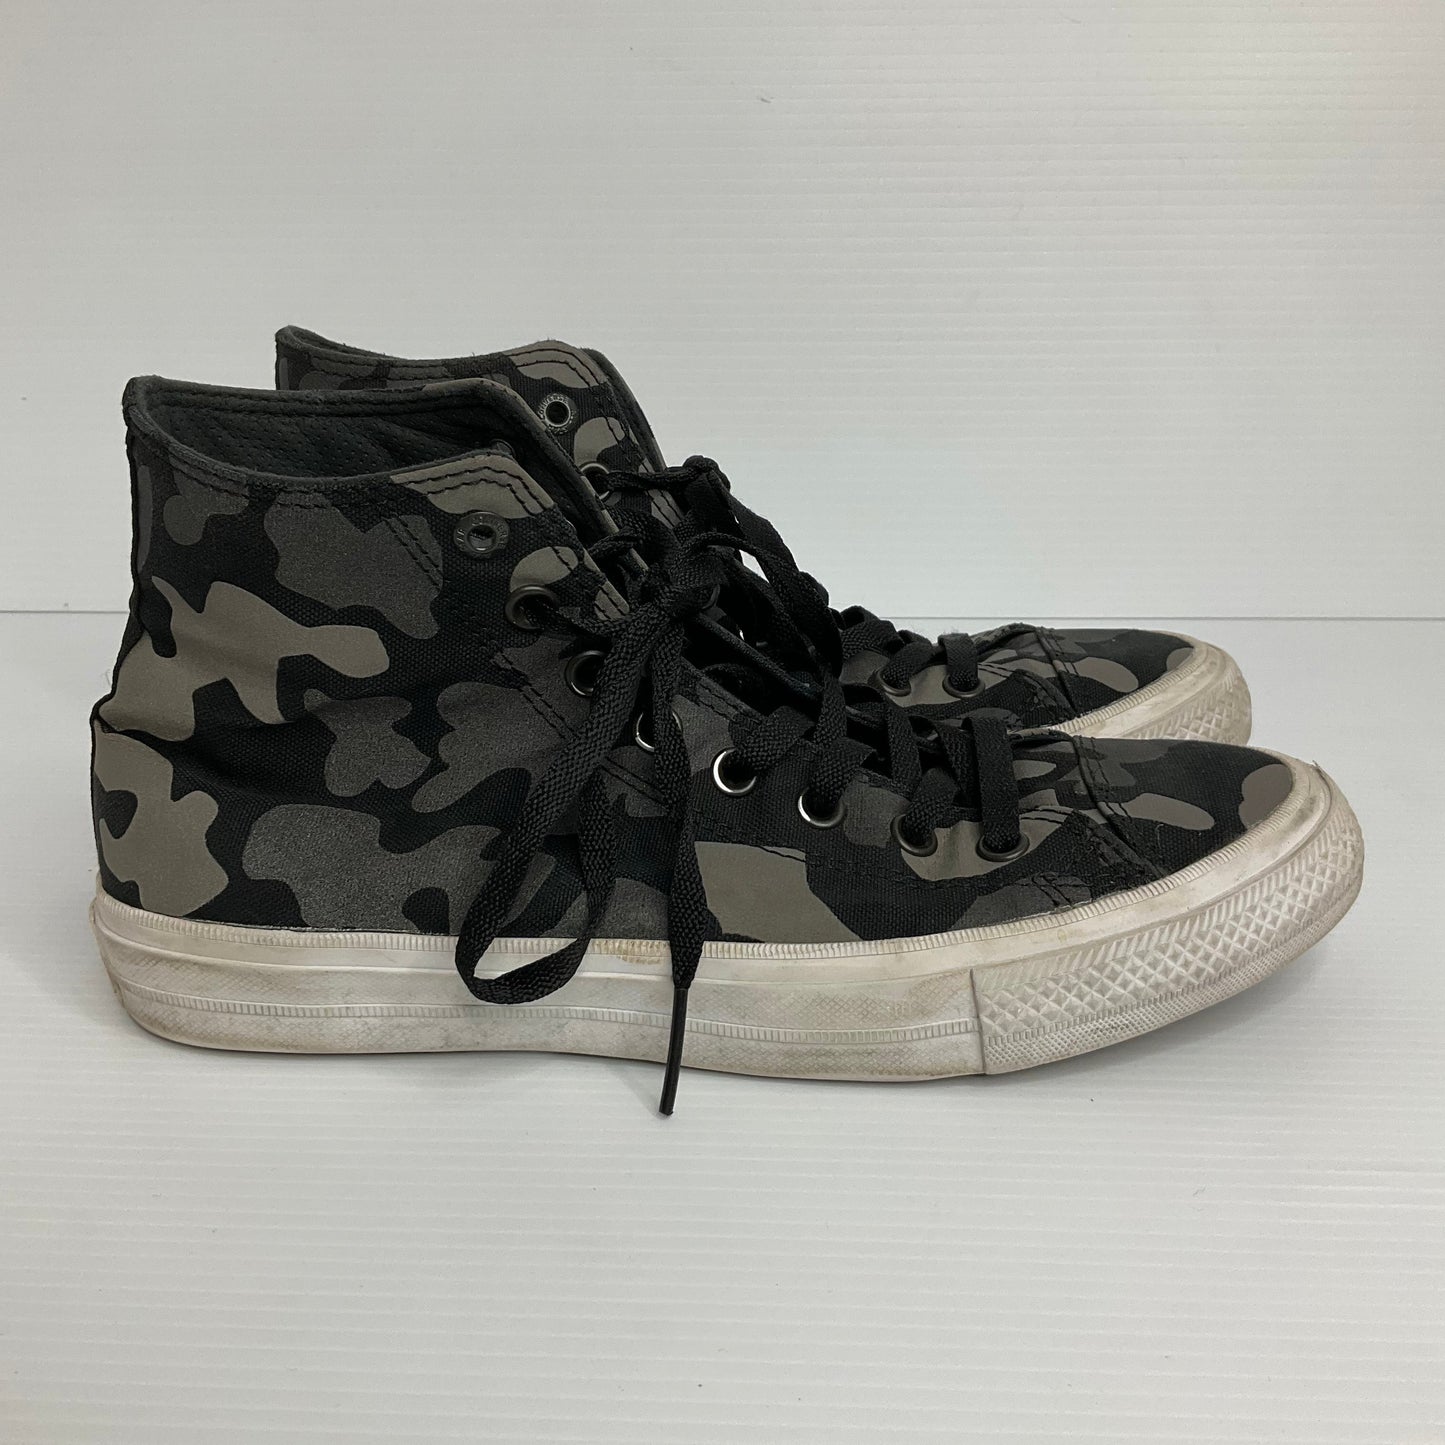 Camouflage Print Shoes Sneakers Converse, Size 10